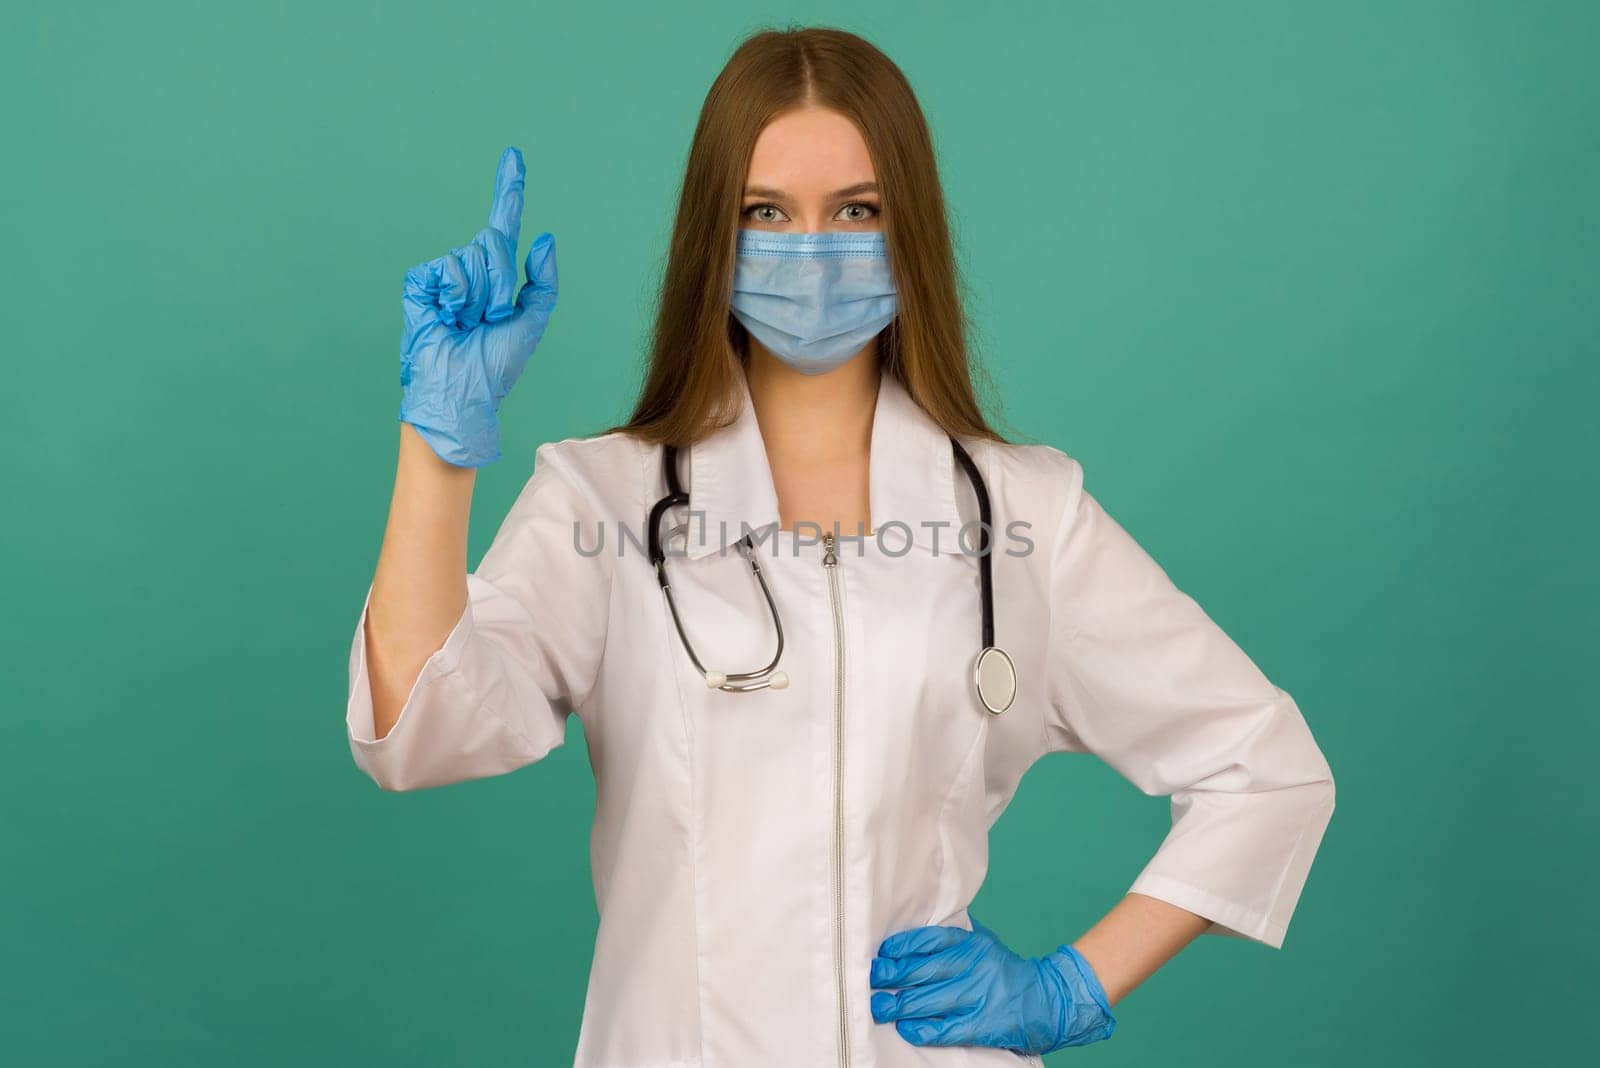 Covid19, coronavirus, healthcare and doctors concept. Portrait of professional confident young caucasian doctor in medical mask and white coat, stethoscope over neck, ready help patient, fight disease by zartarn